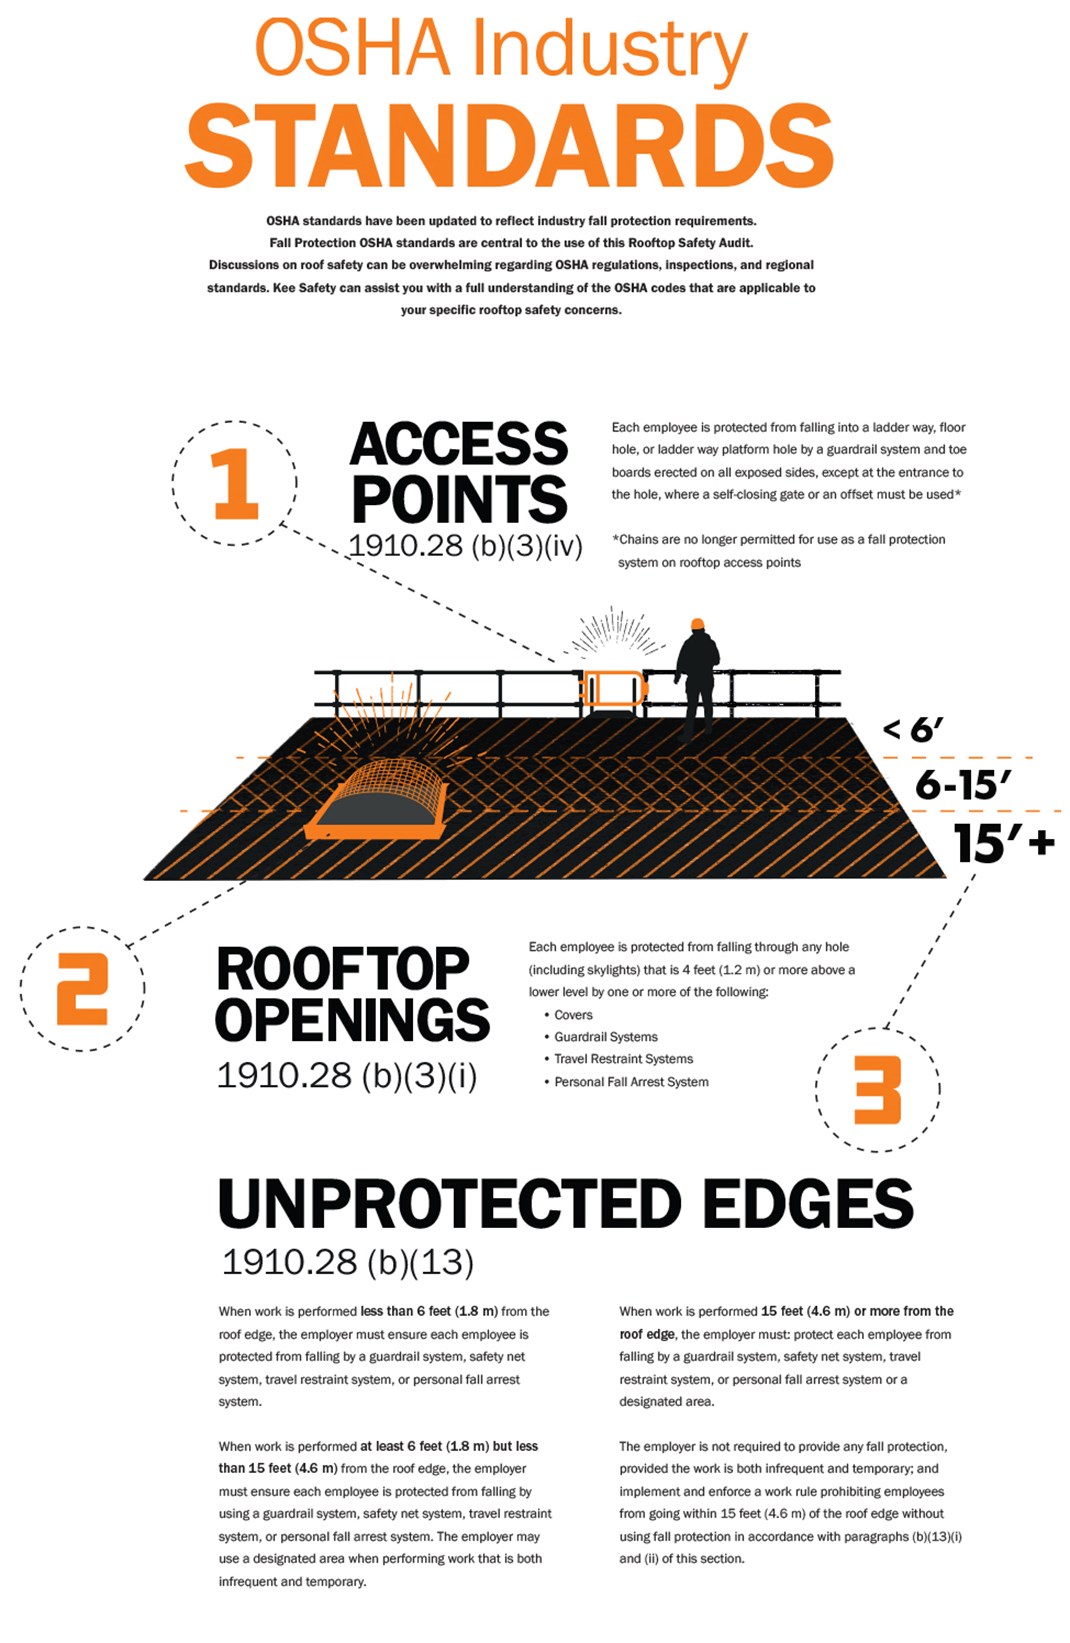 Kee Safety Top 3 Fall Protection Hazards